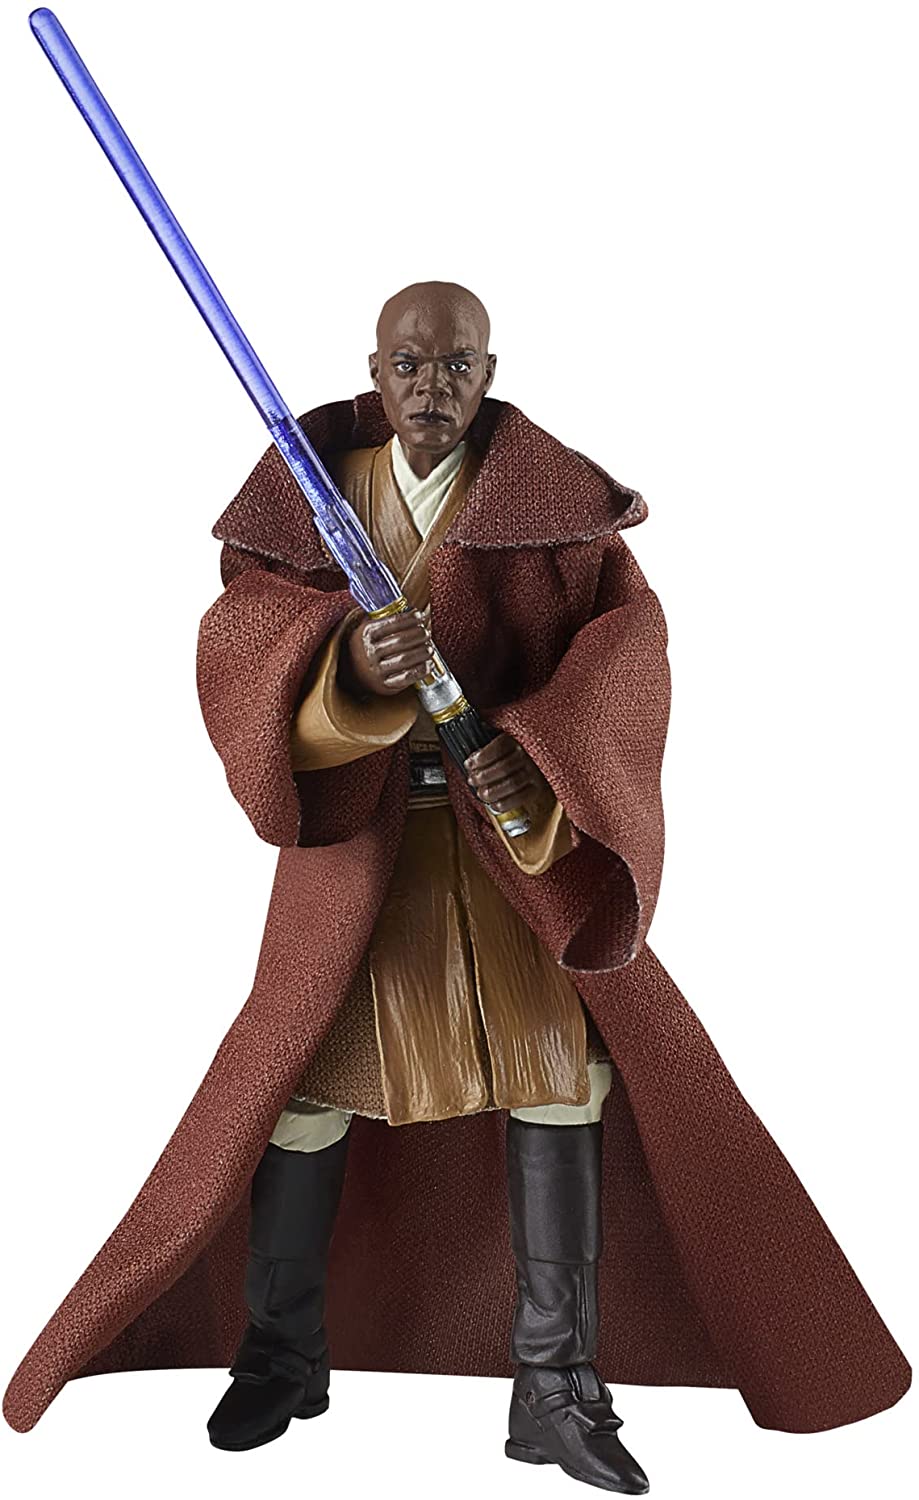 Hasbro Star Wars F4495 Vintage Collection Mace Windu VC35, 3.75-Inch-Scale Star